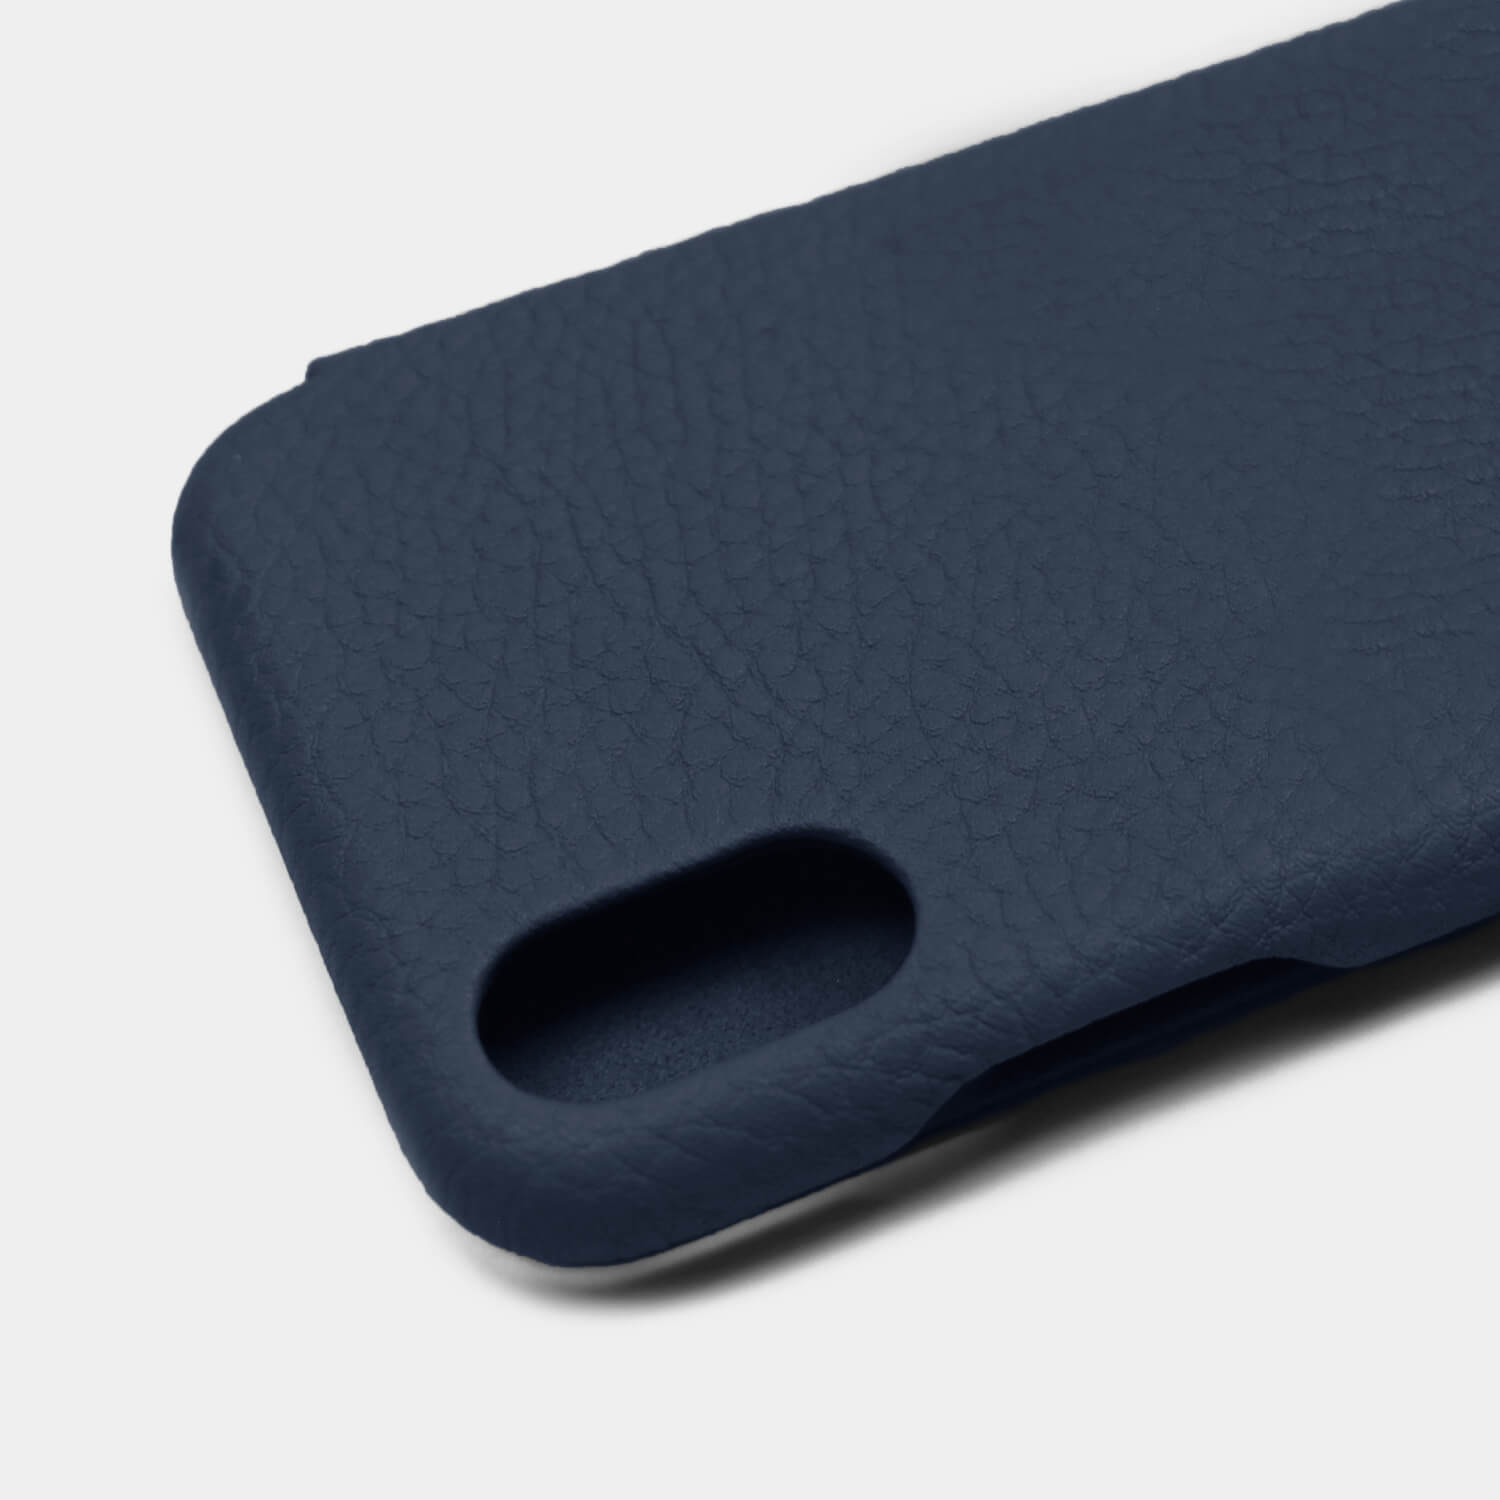 Pebble grain leather phone flip over screen cover and case to protect the phone for all models